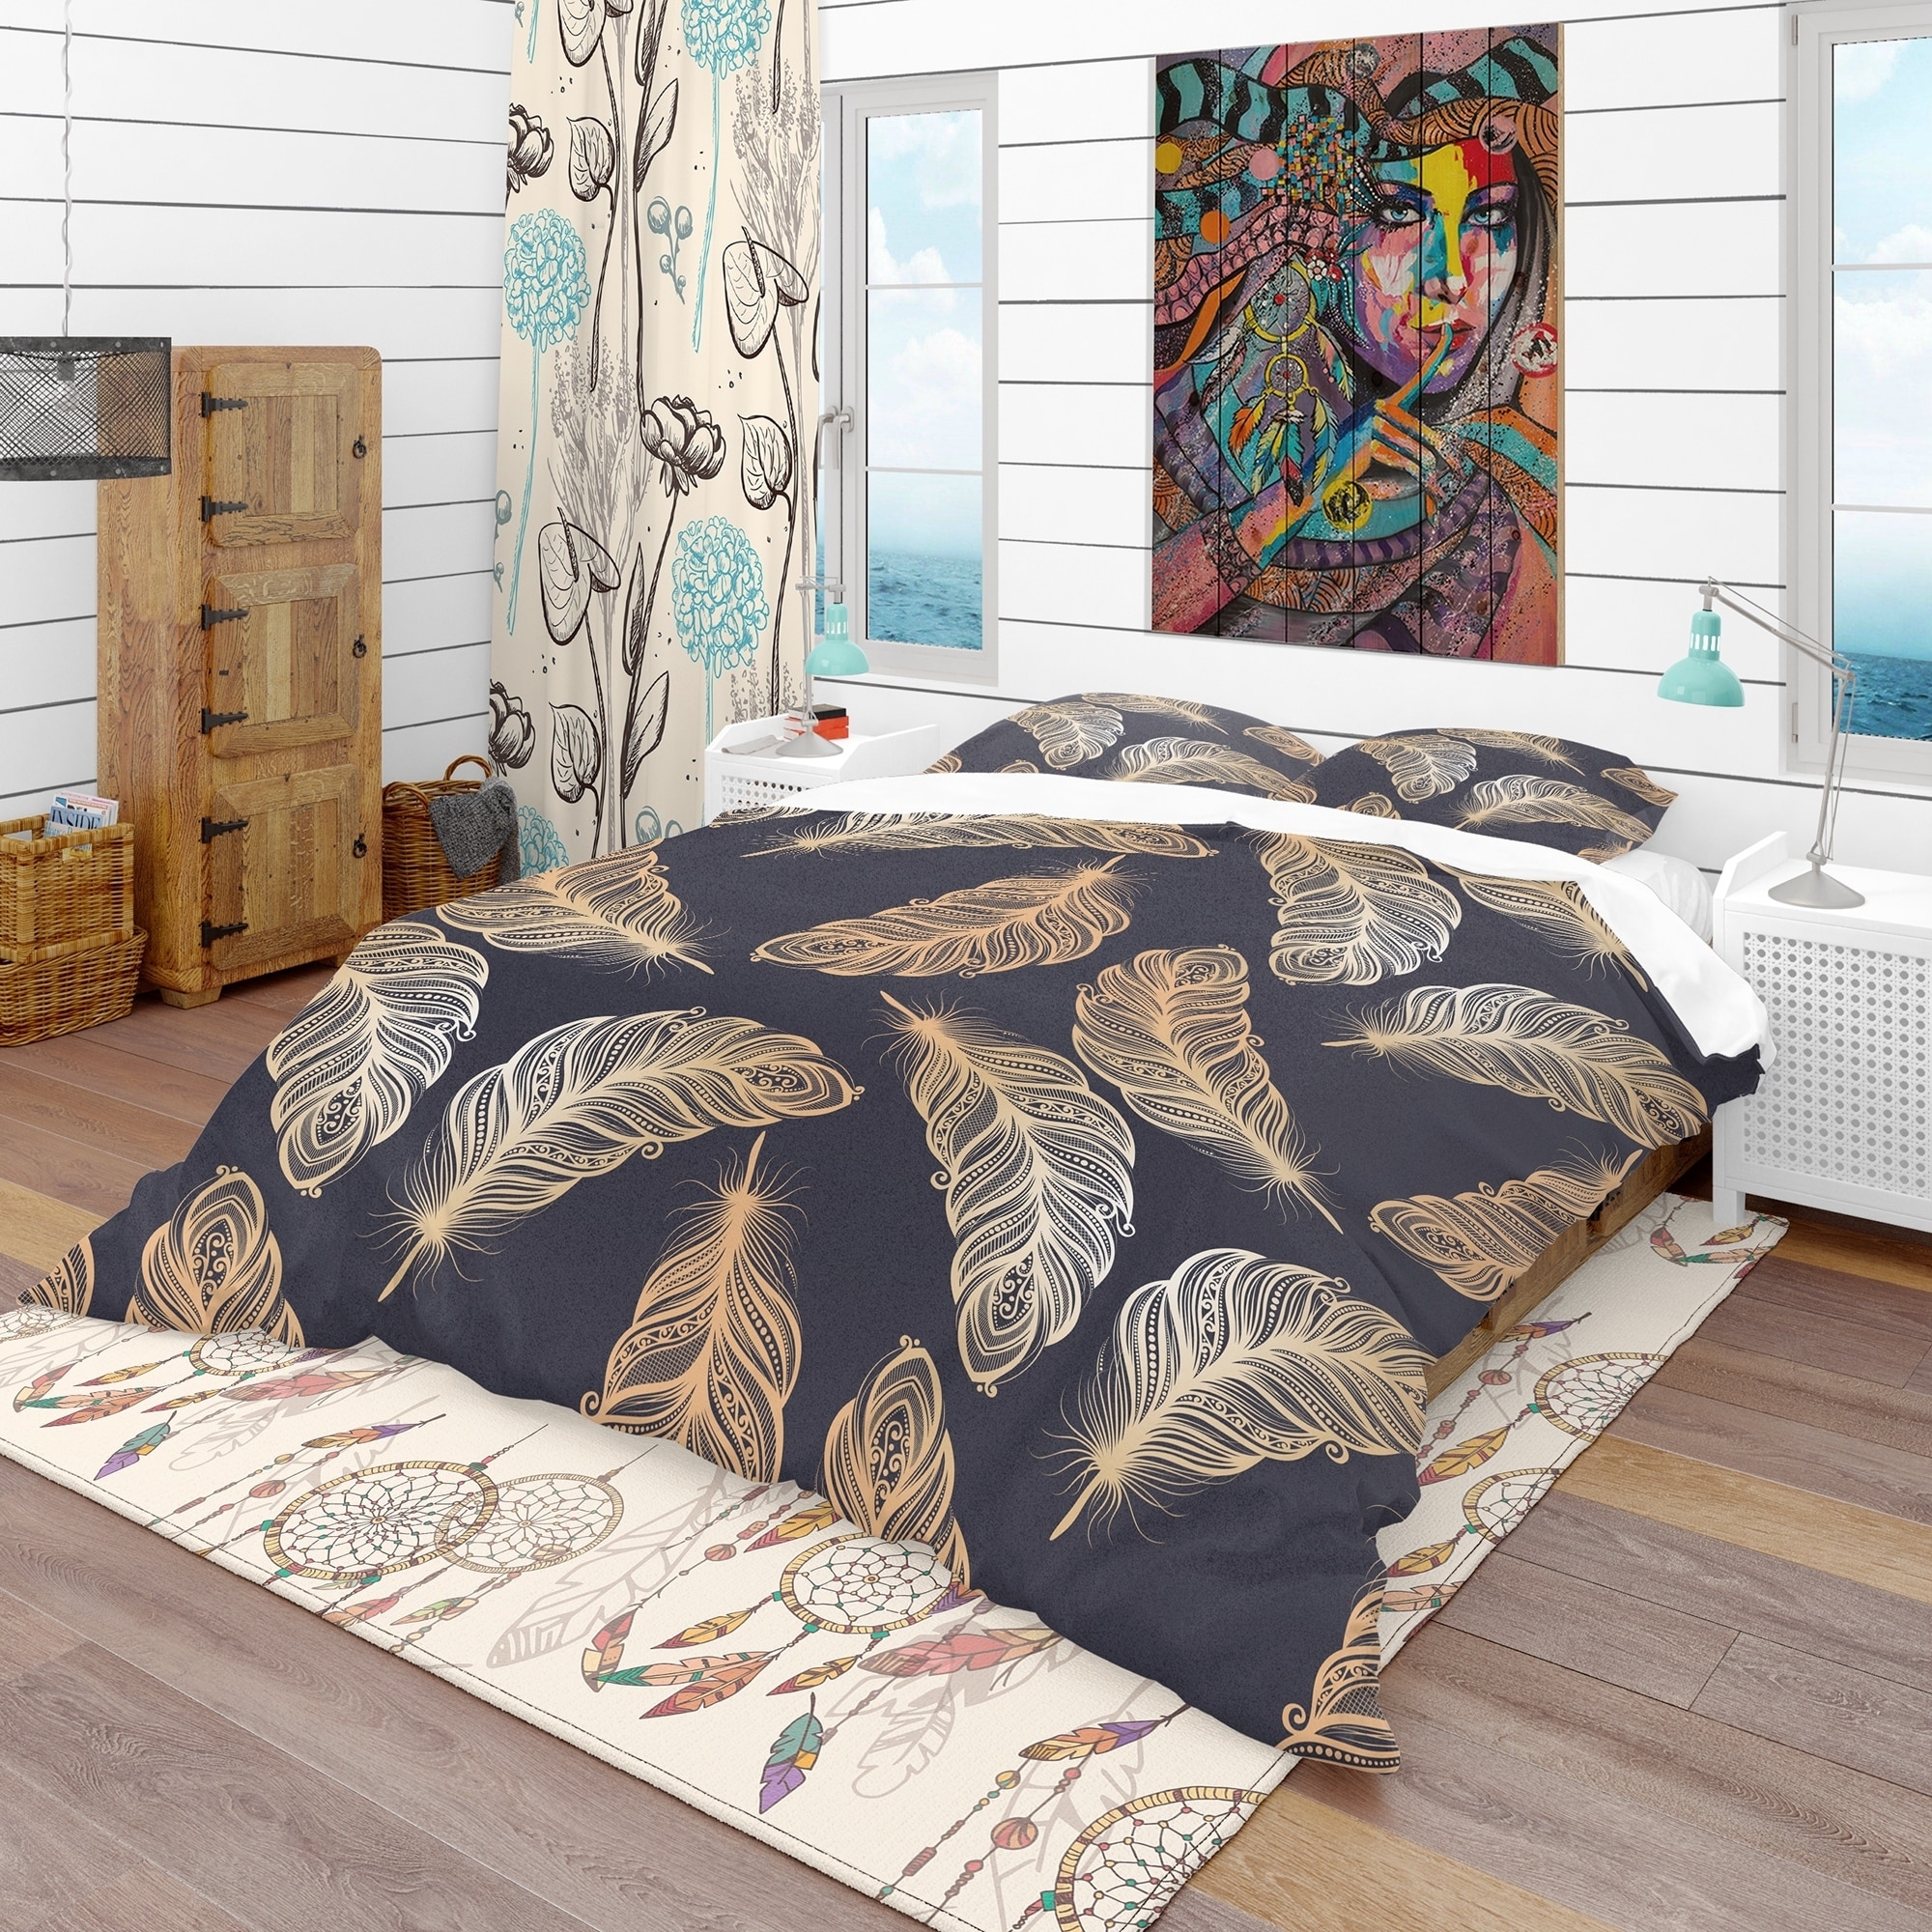 Feathers Design Luxurious Modern Style Duvet Cover Sets Reversible